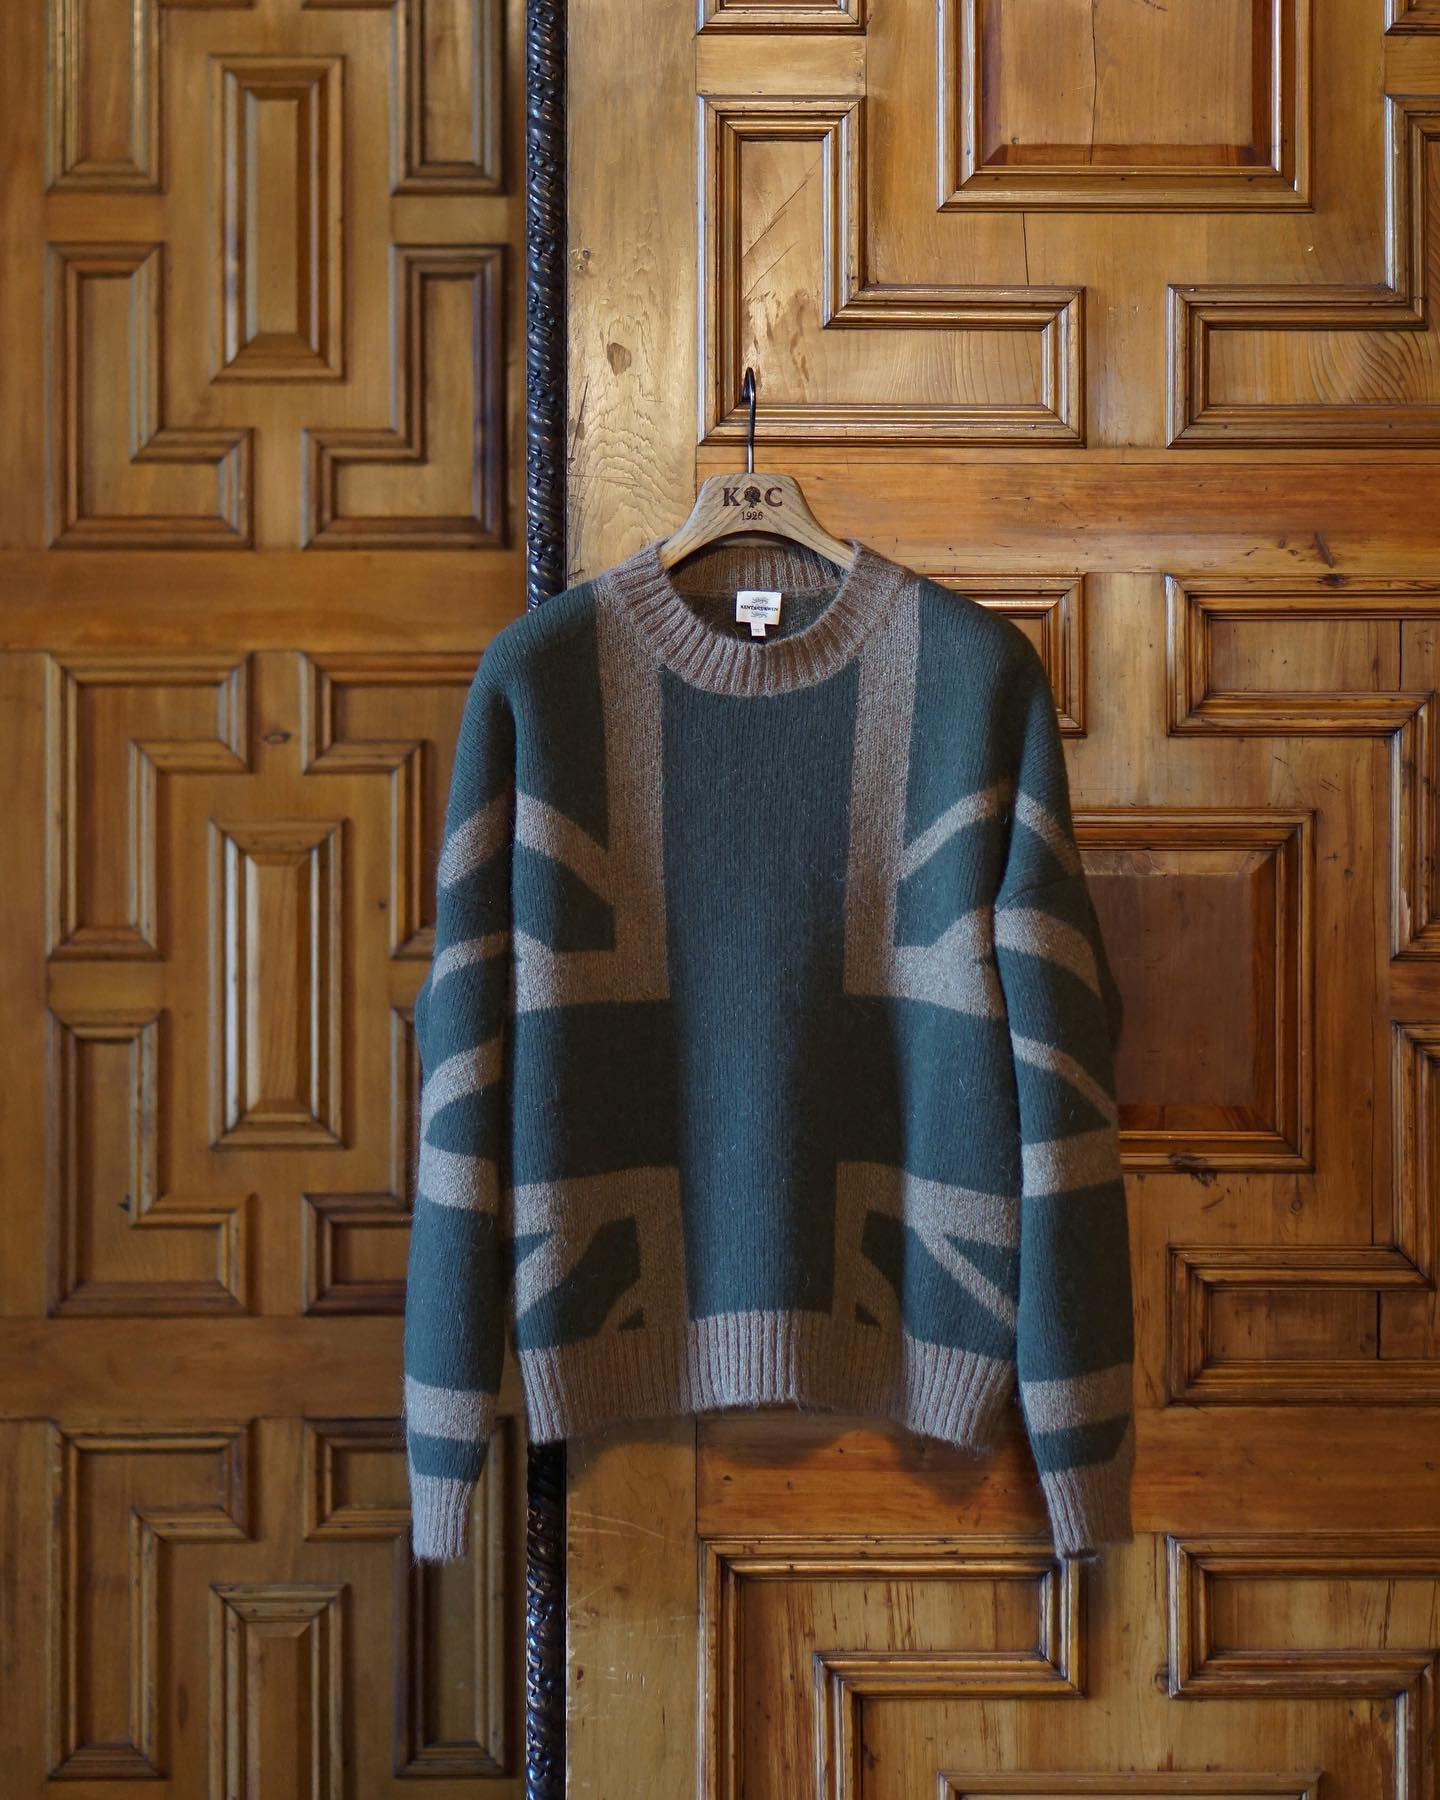 Our union jack crewneck is spun from wool and mohair blend making it a luxurious addition to your winter wardrobe.